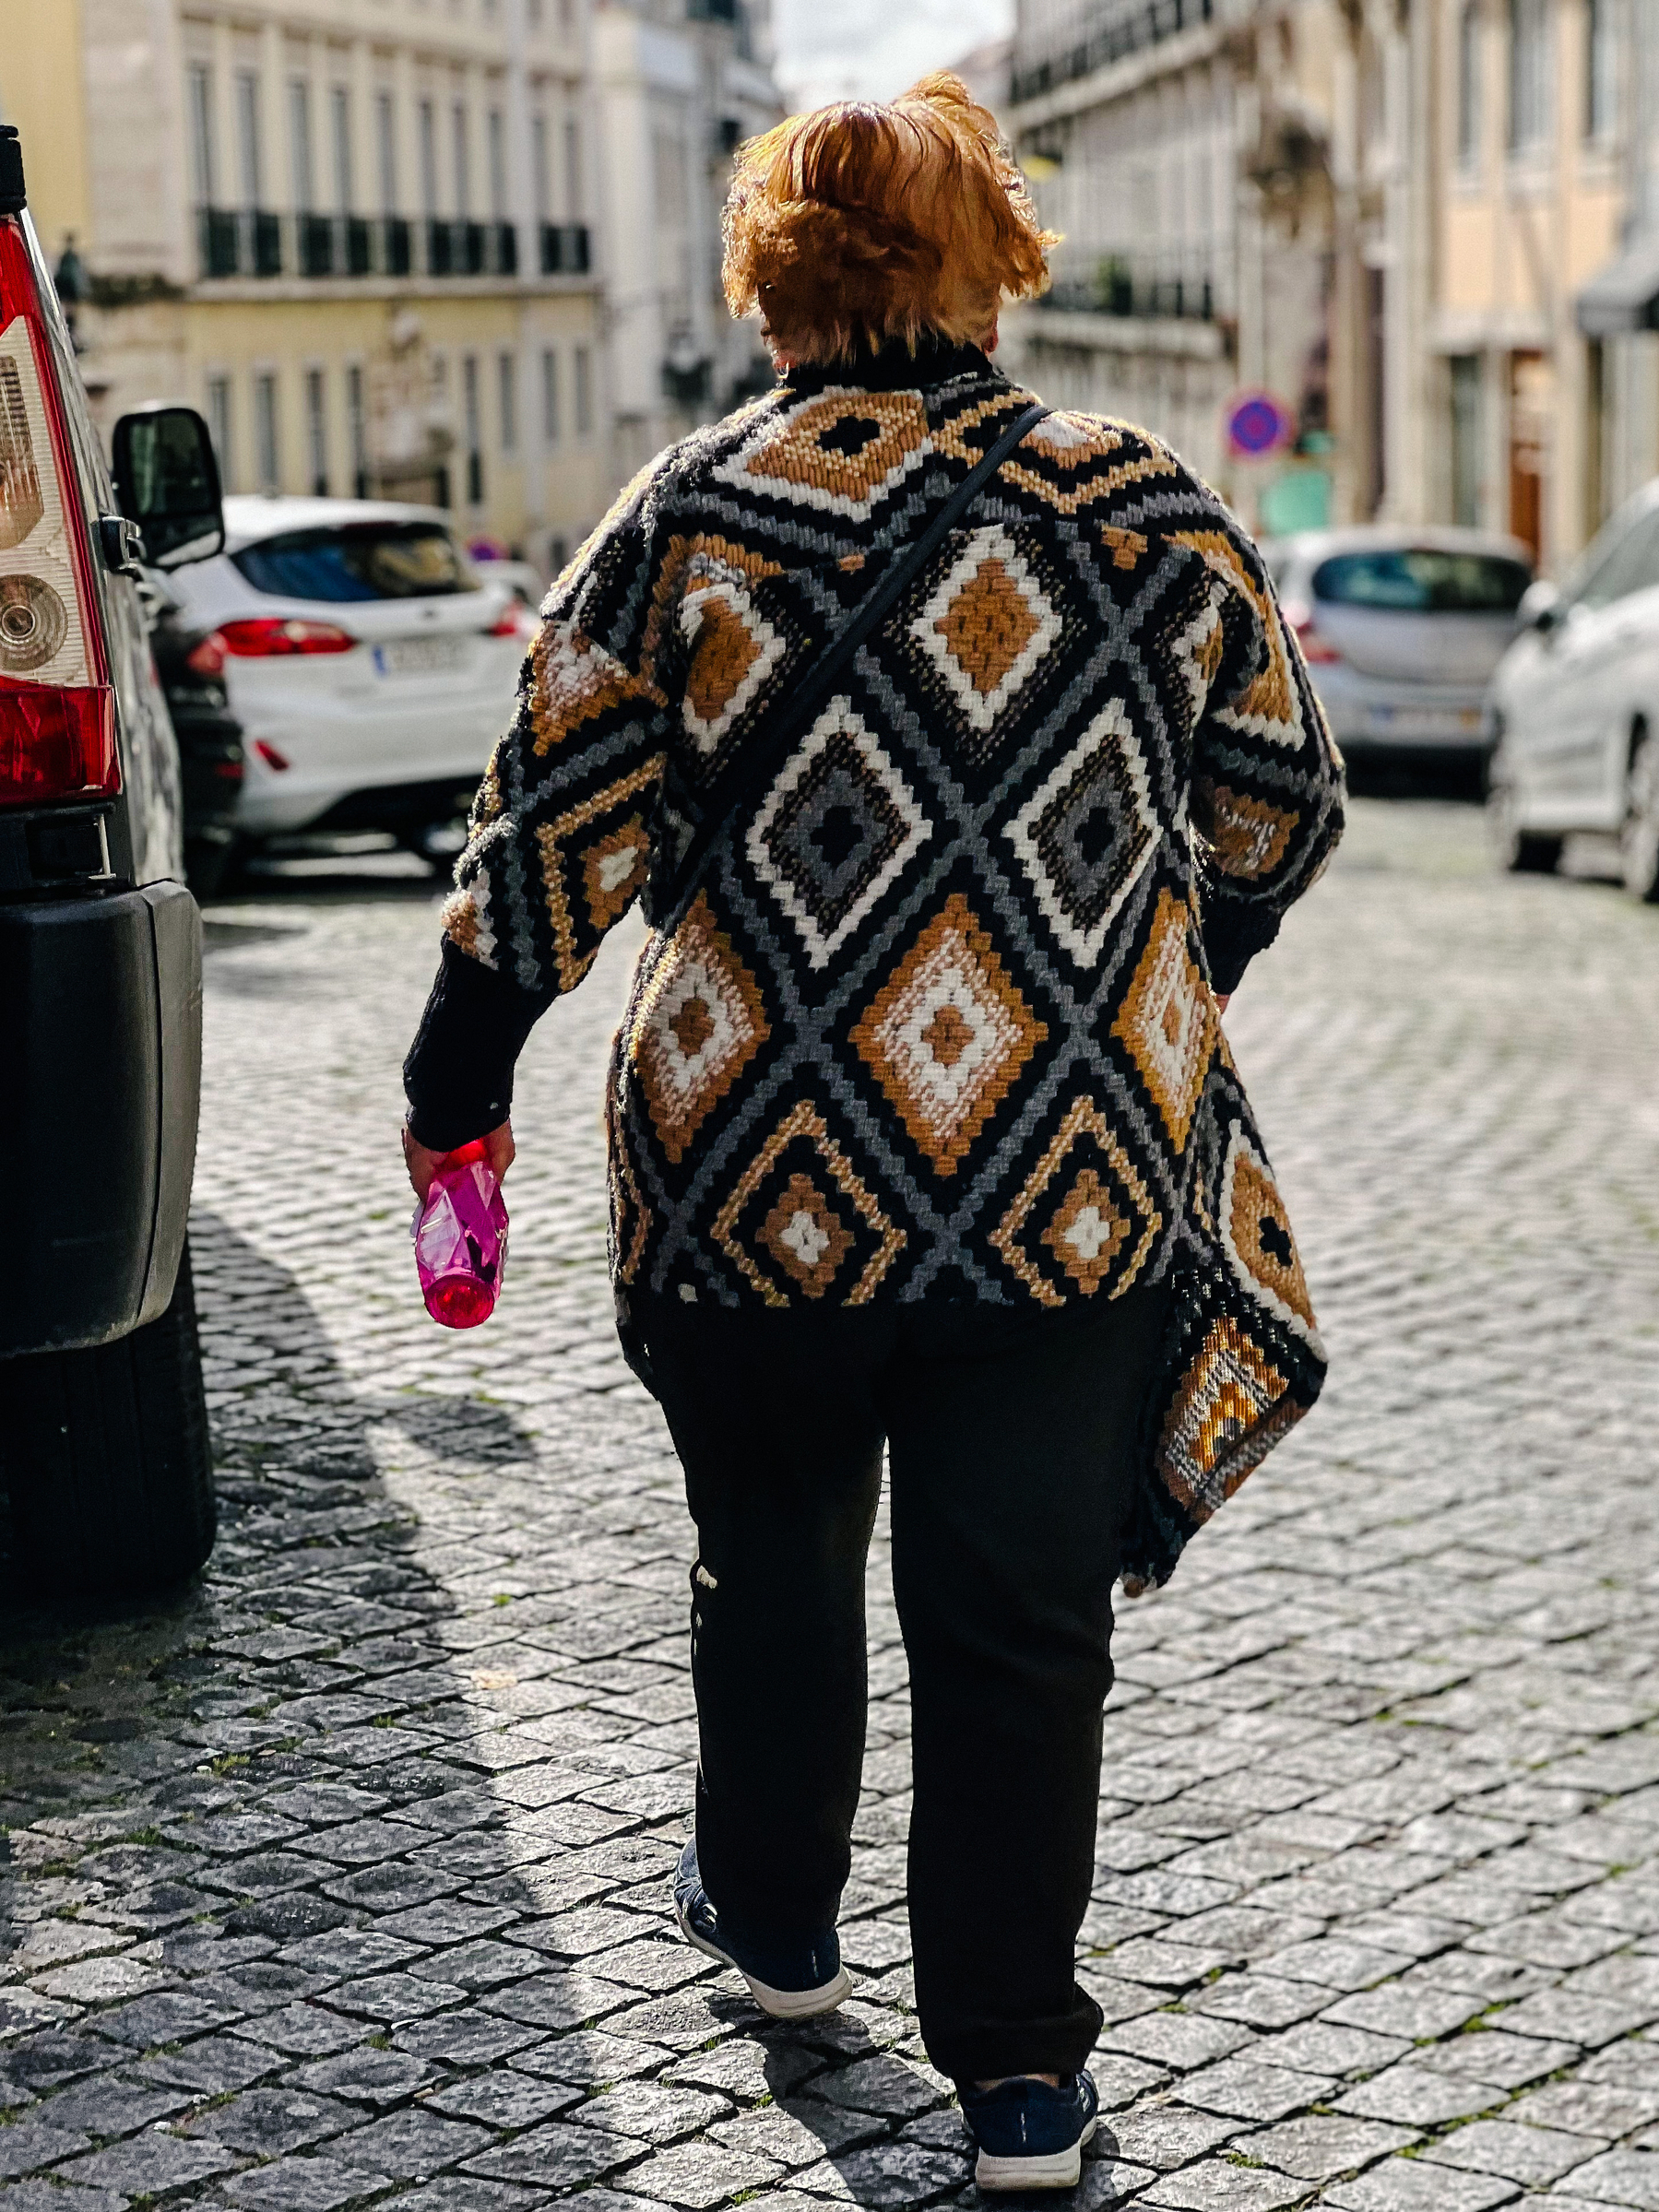 A woman walking in front of us, with a pink bottle in her hand. 